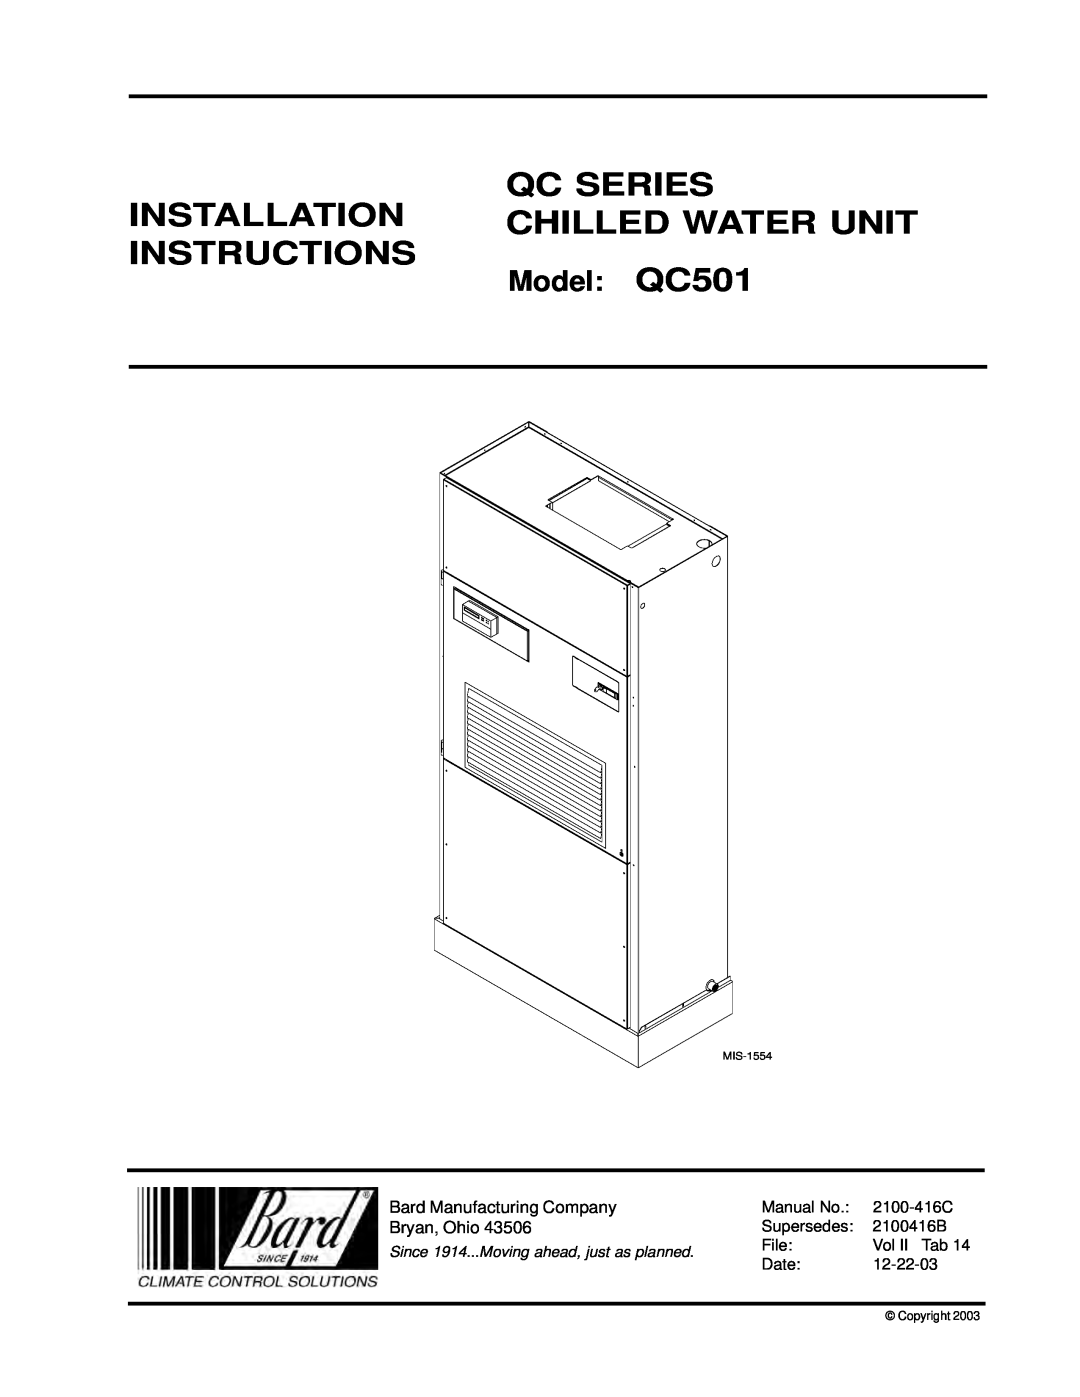 Bard installation instructions Qc Series, Installation Chilled Water Unit Instructions, Model QC501, Copyright 